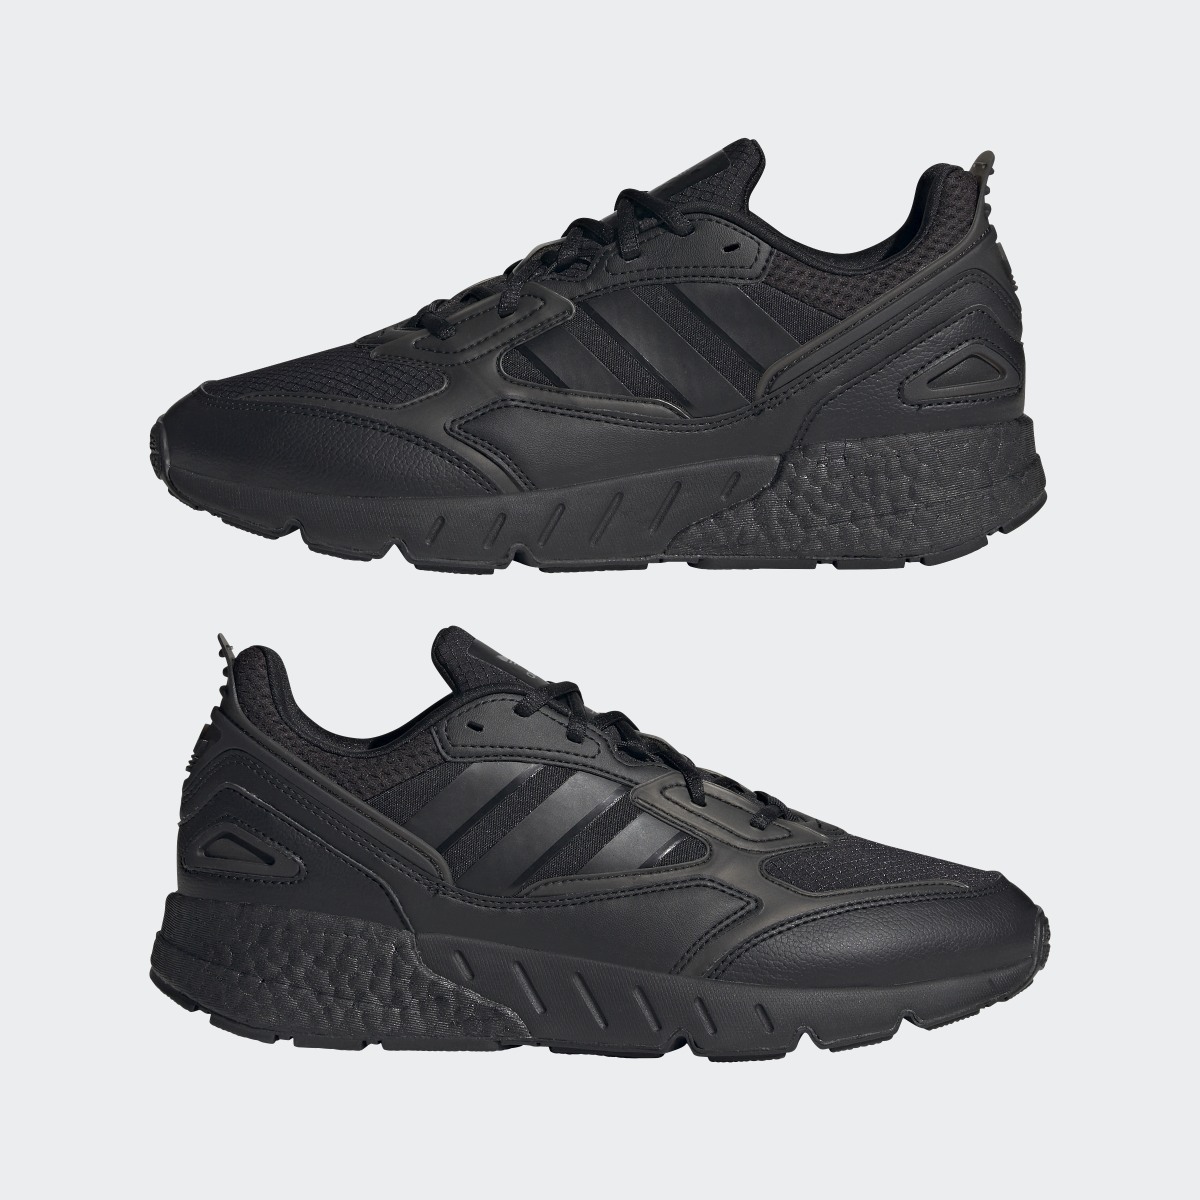 Adidas ZX 1K Boost 2.0 Shoes. 8